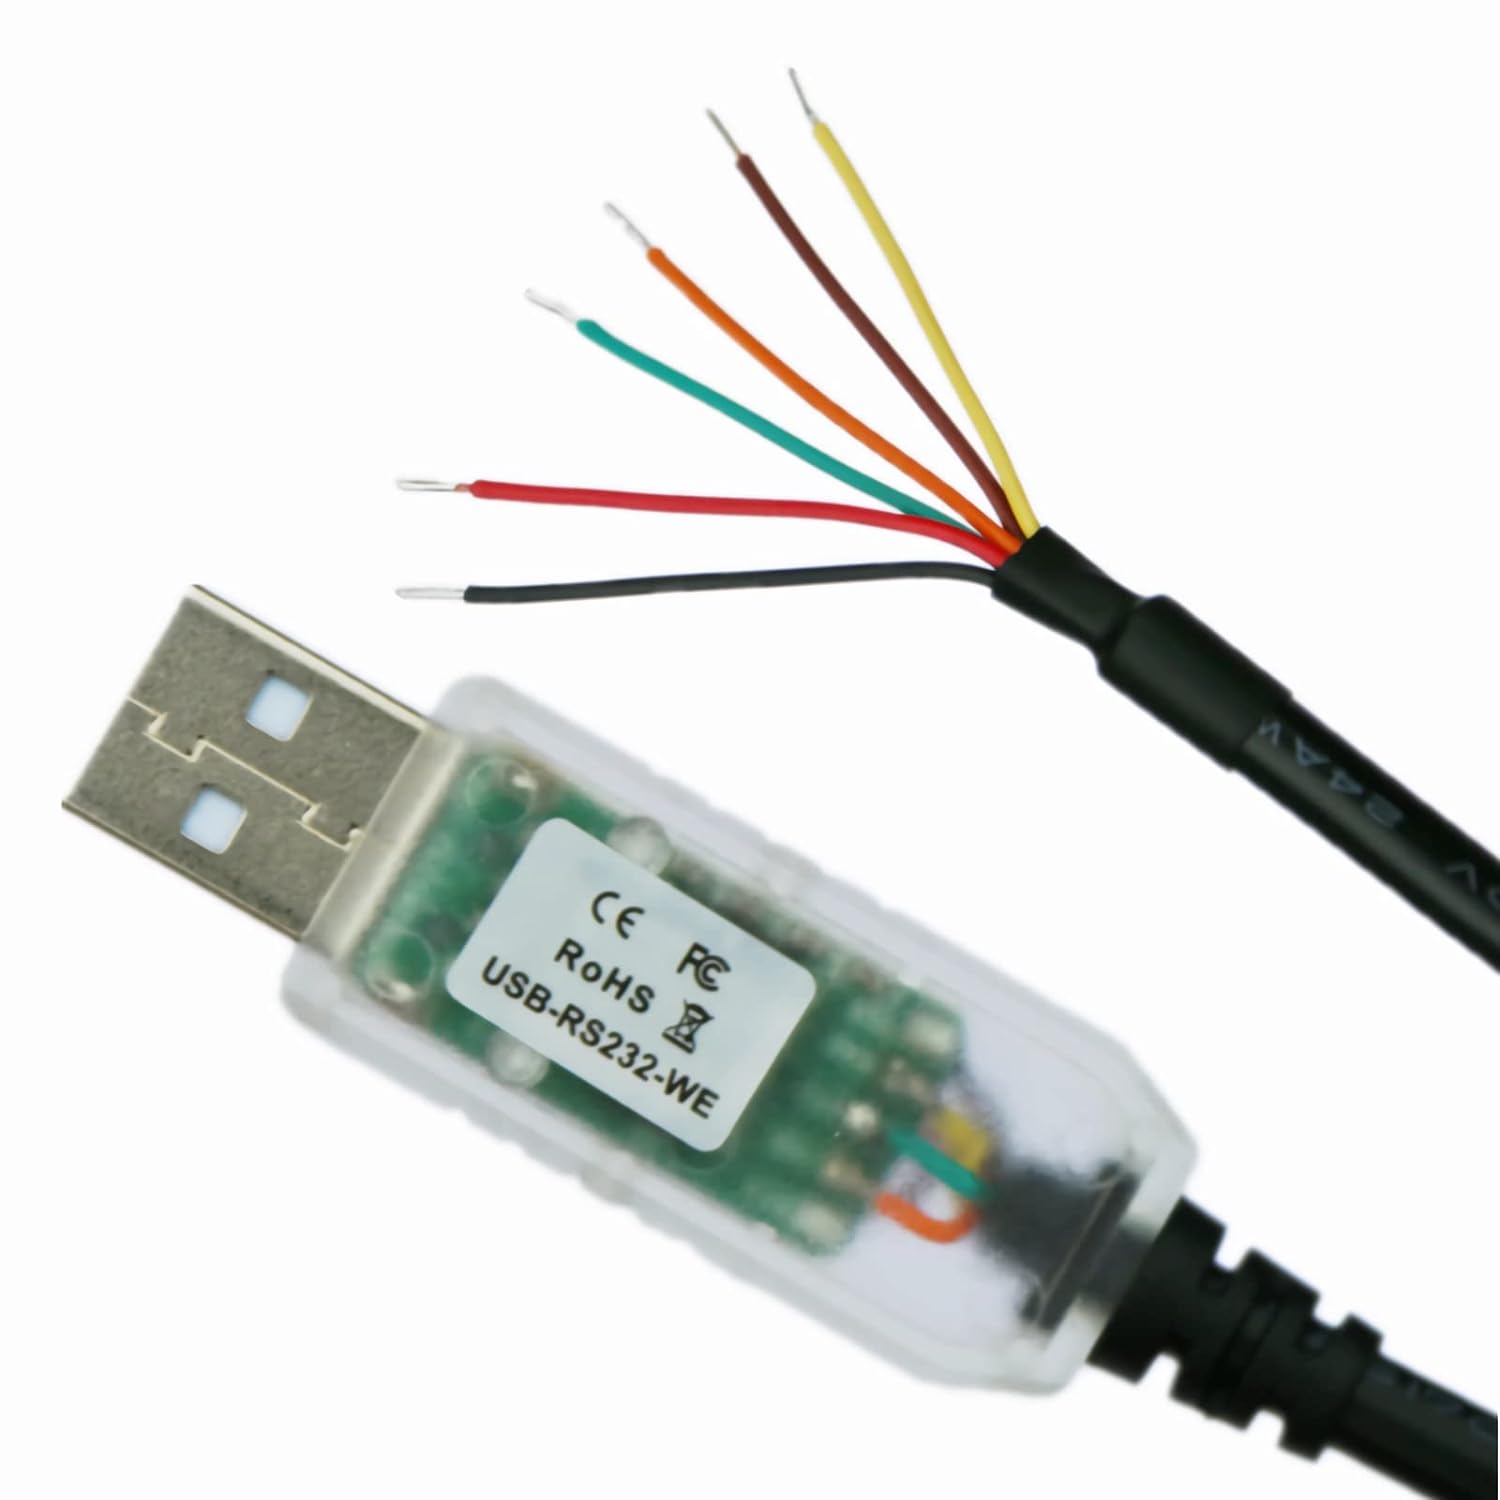 FTDI USB-RS232-WE-1800-BT Cable, 1.8M, Wire END (5V)